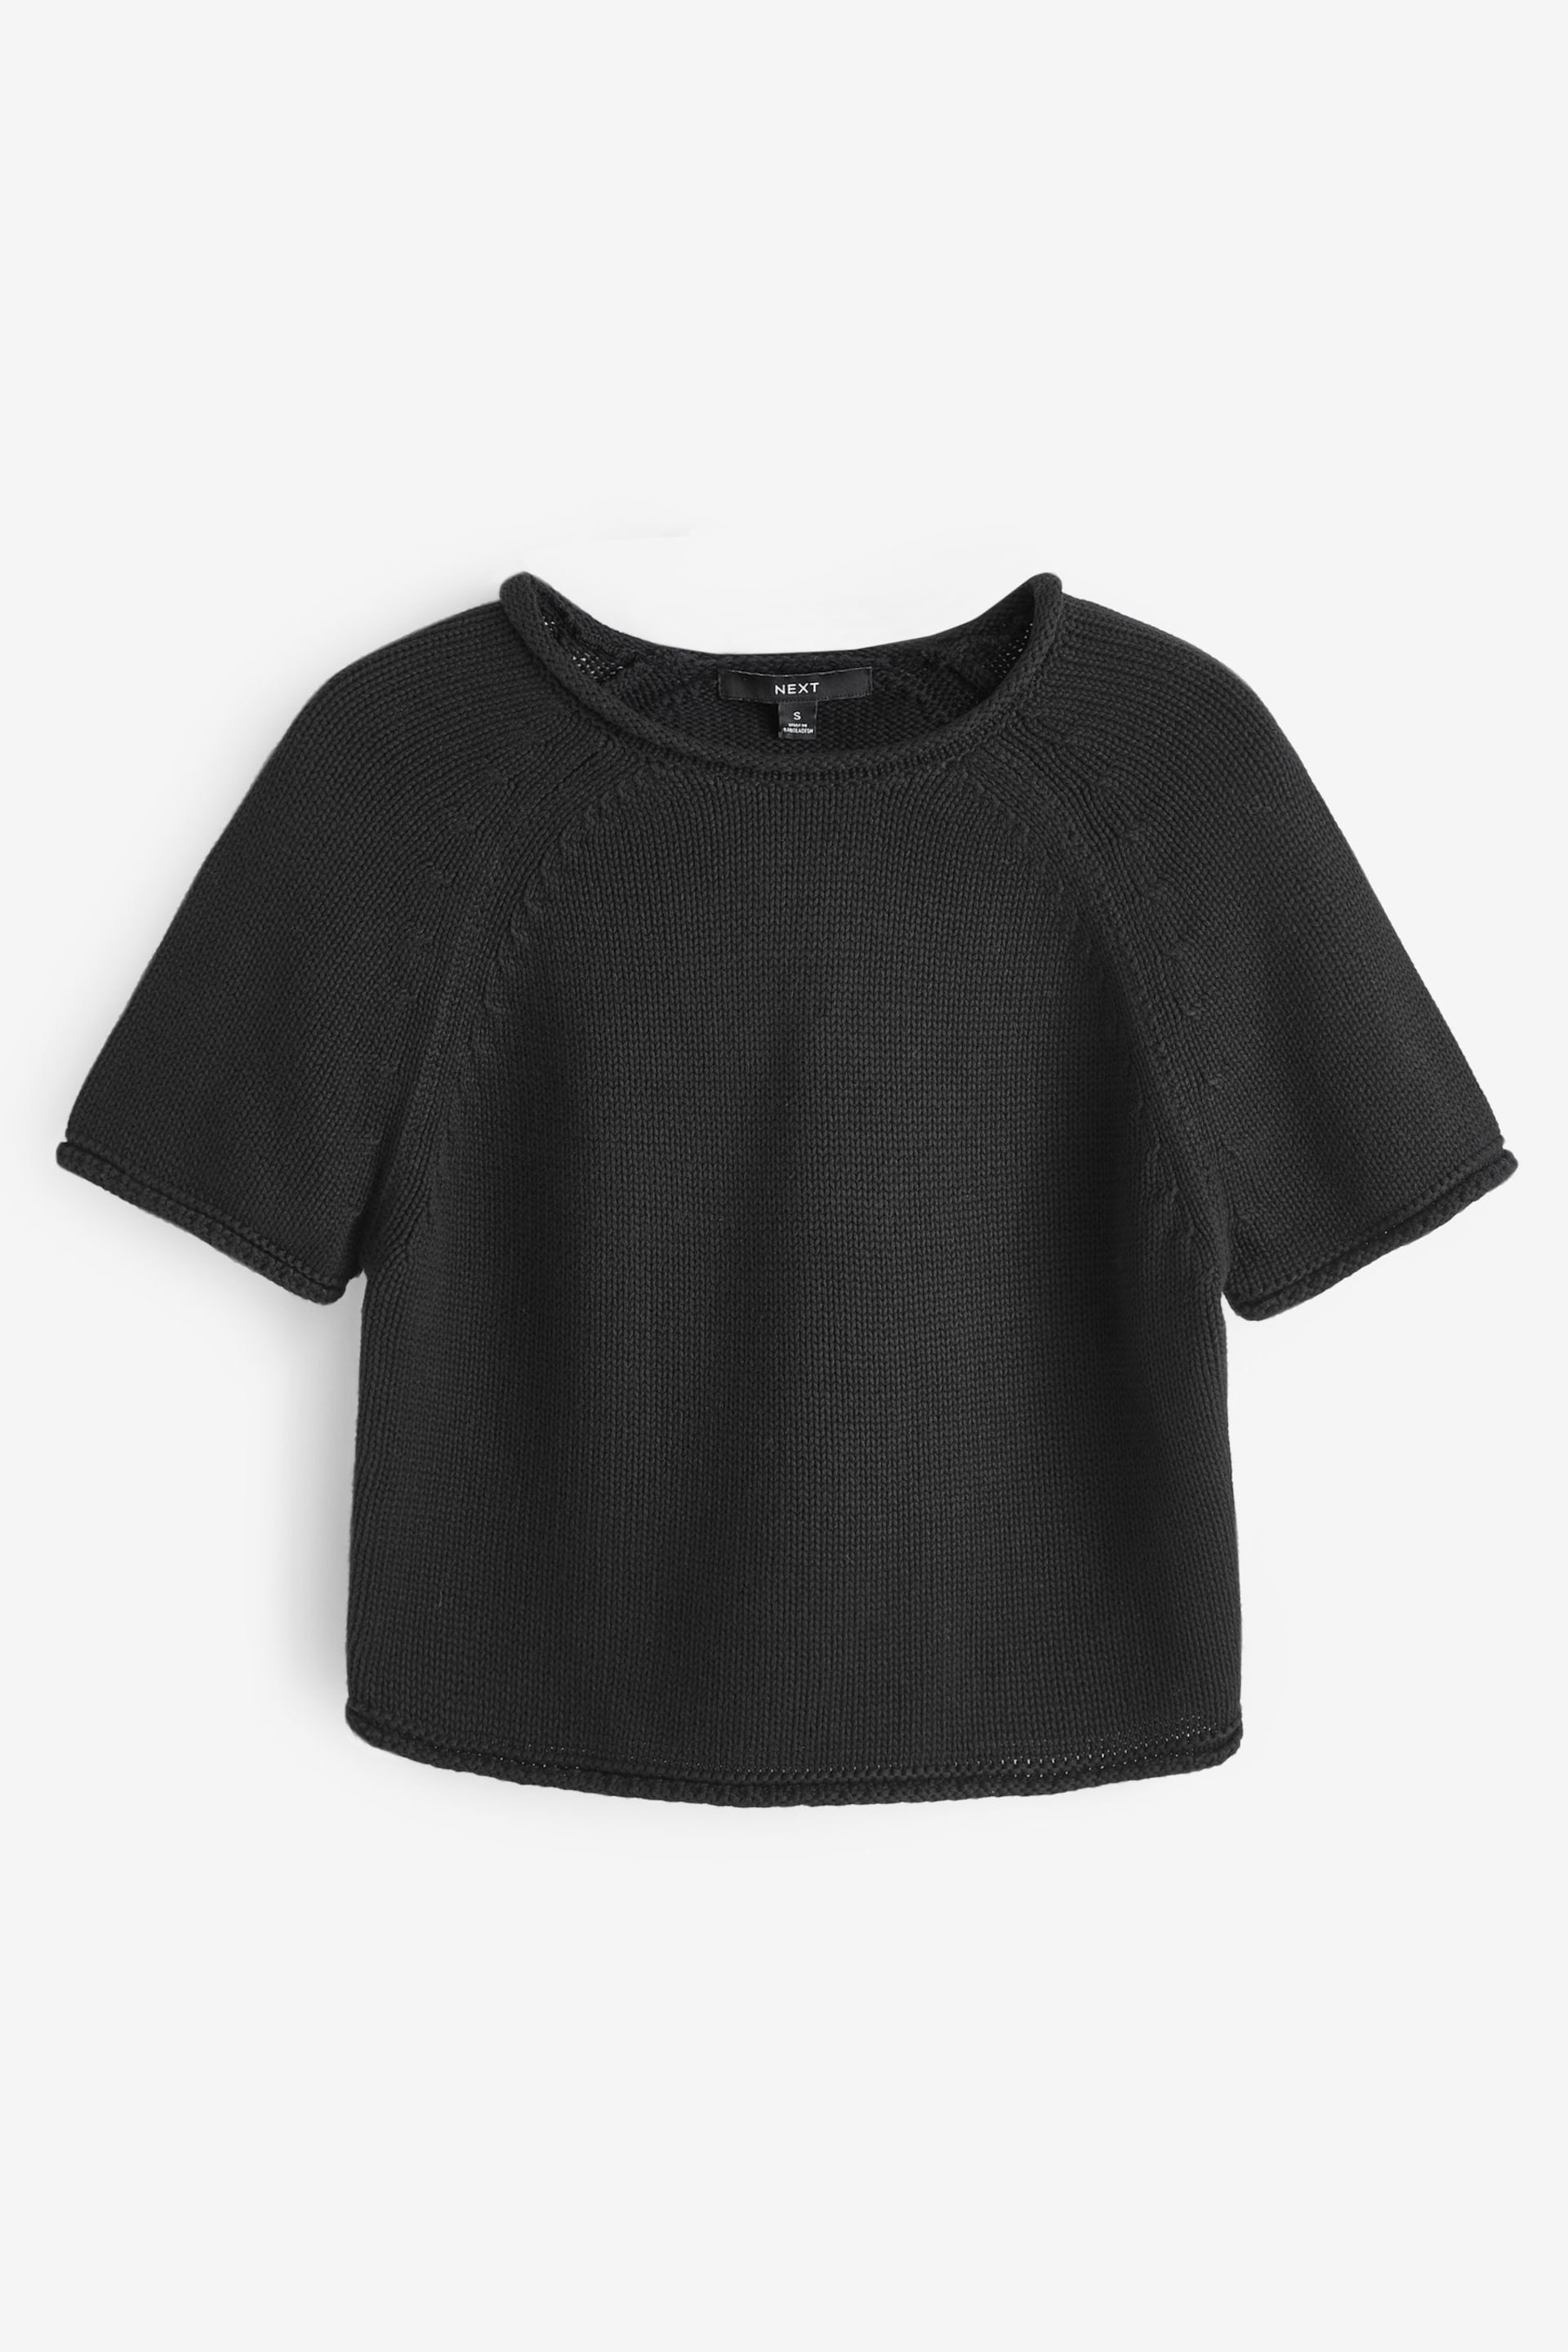 Black 100% Cotton Roll Edge Knitted T-Shirt - Image 6 of 6